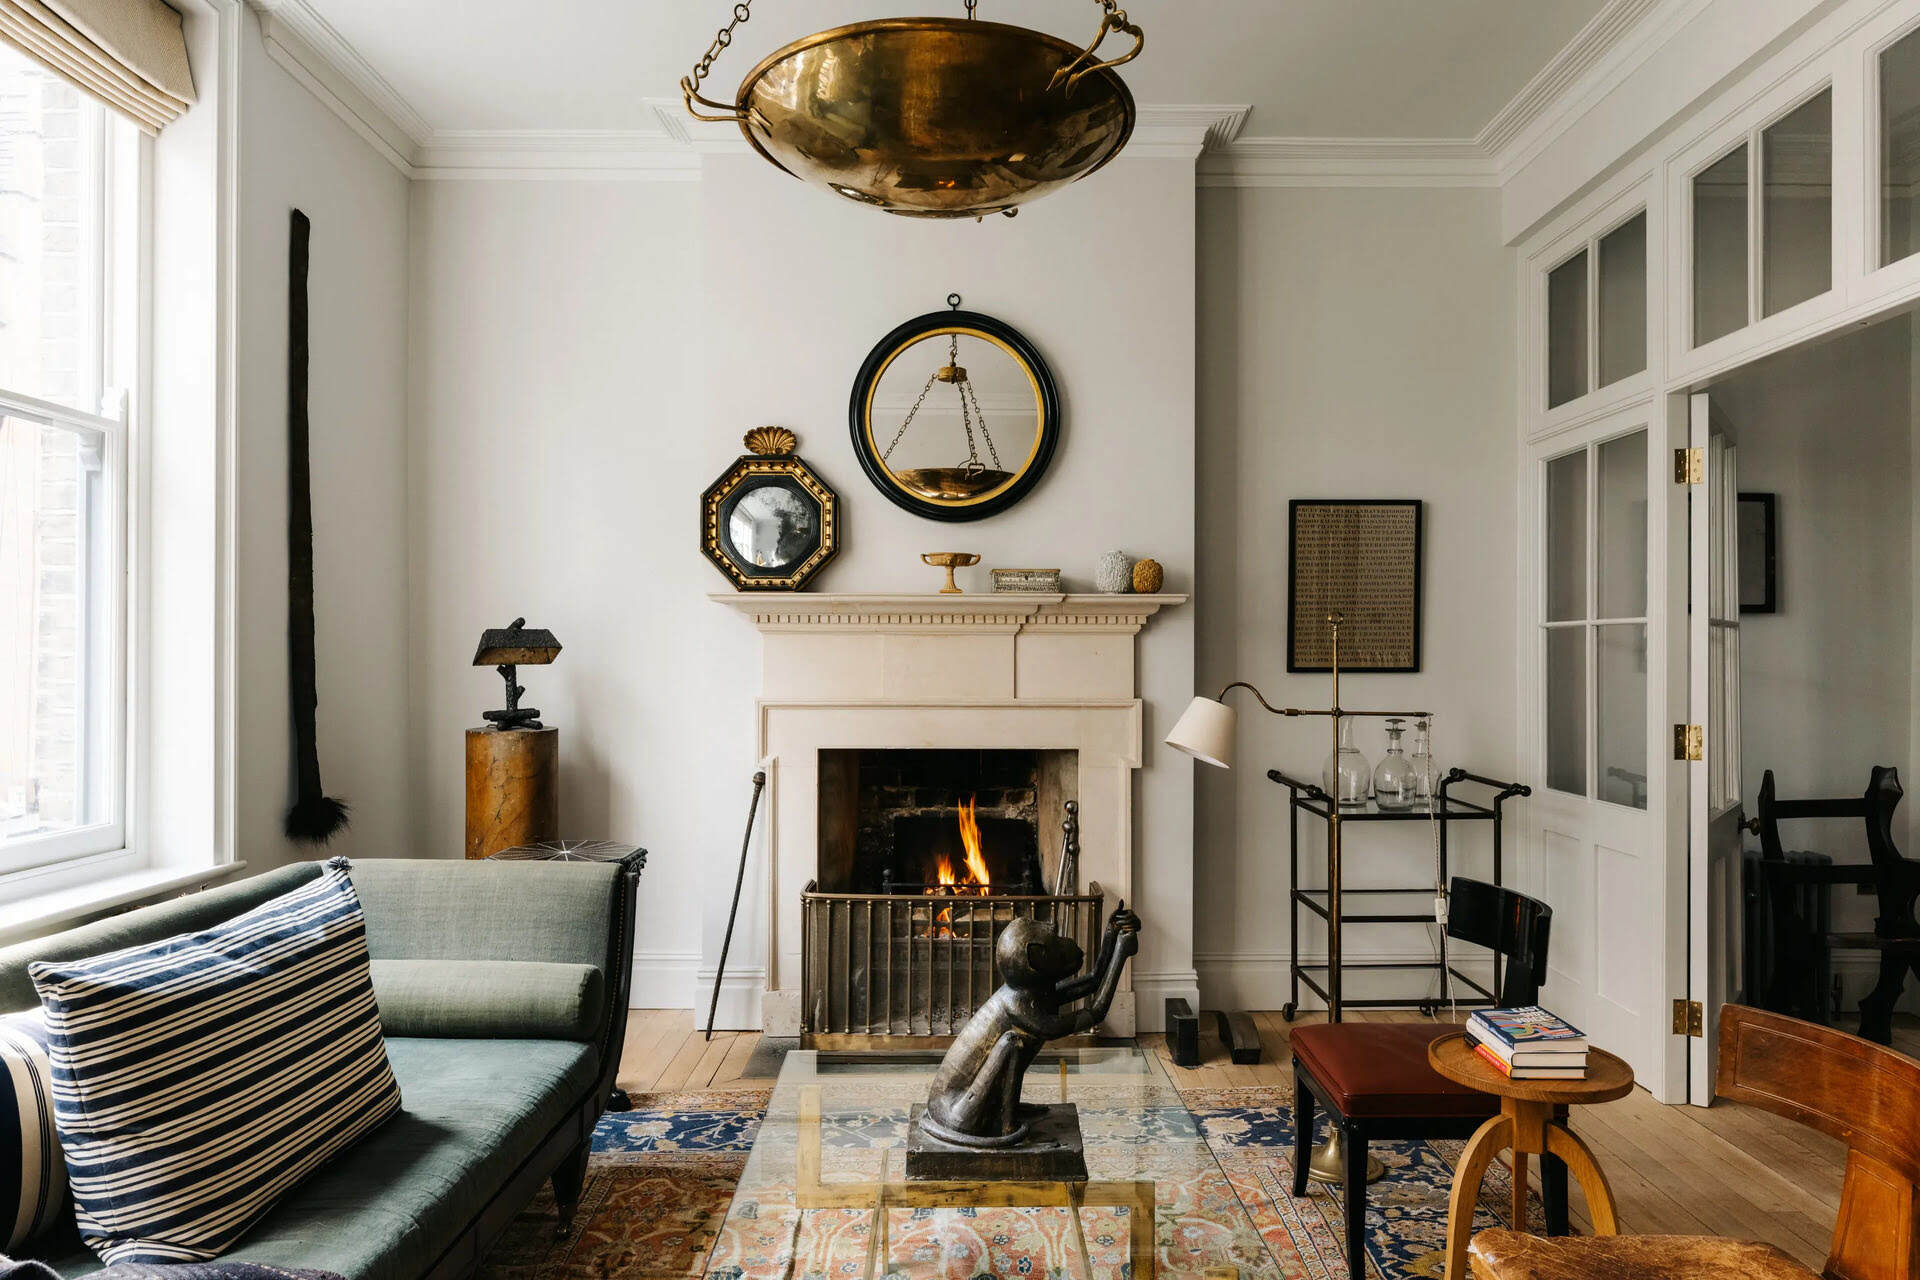 How To Design A Living Room With A Fireplace